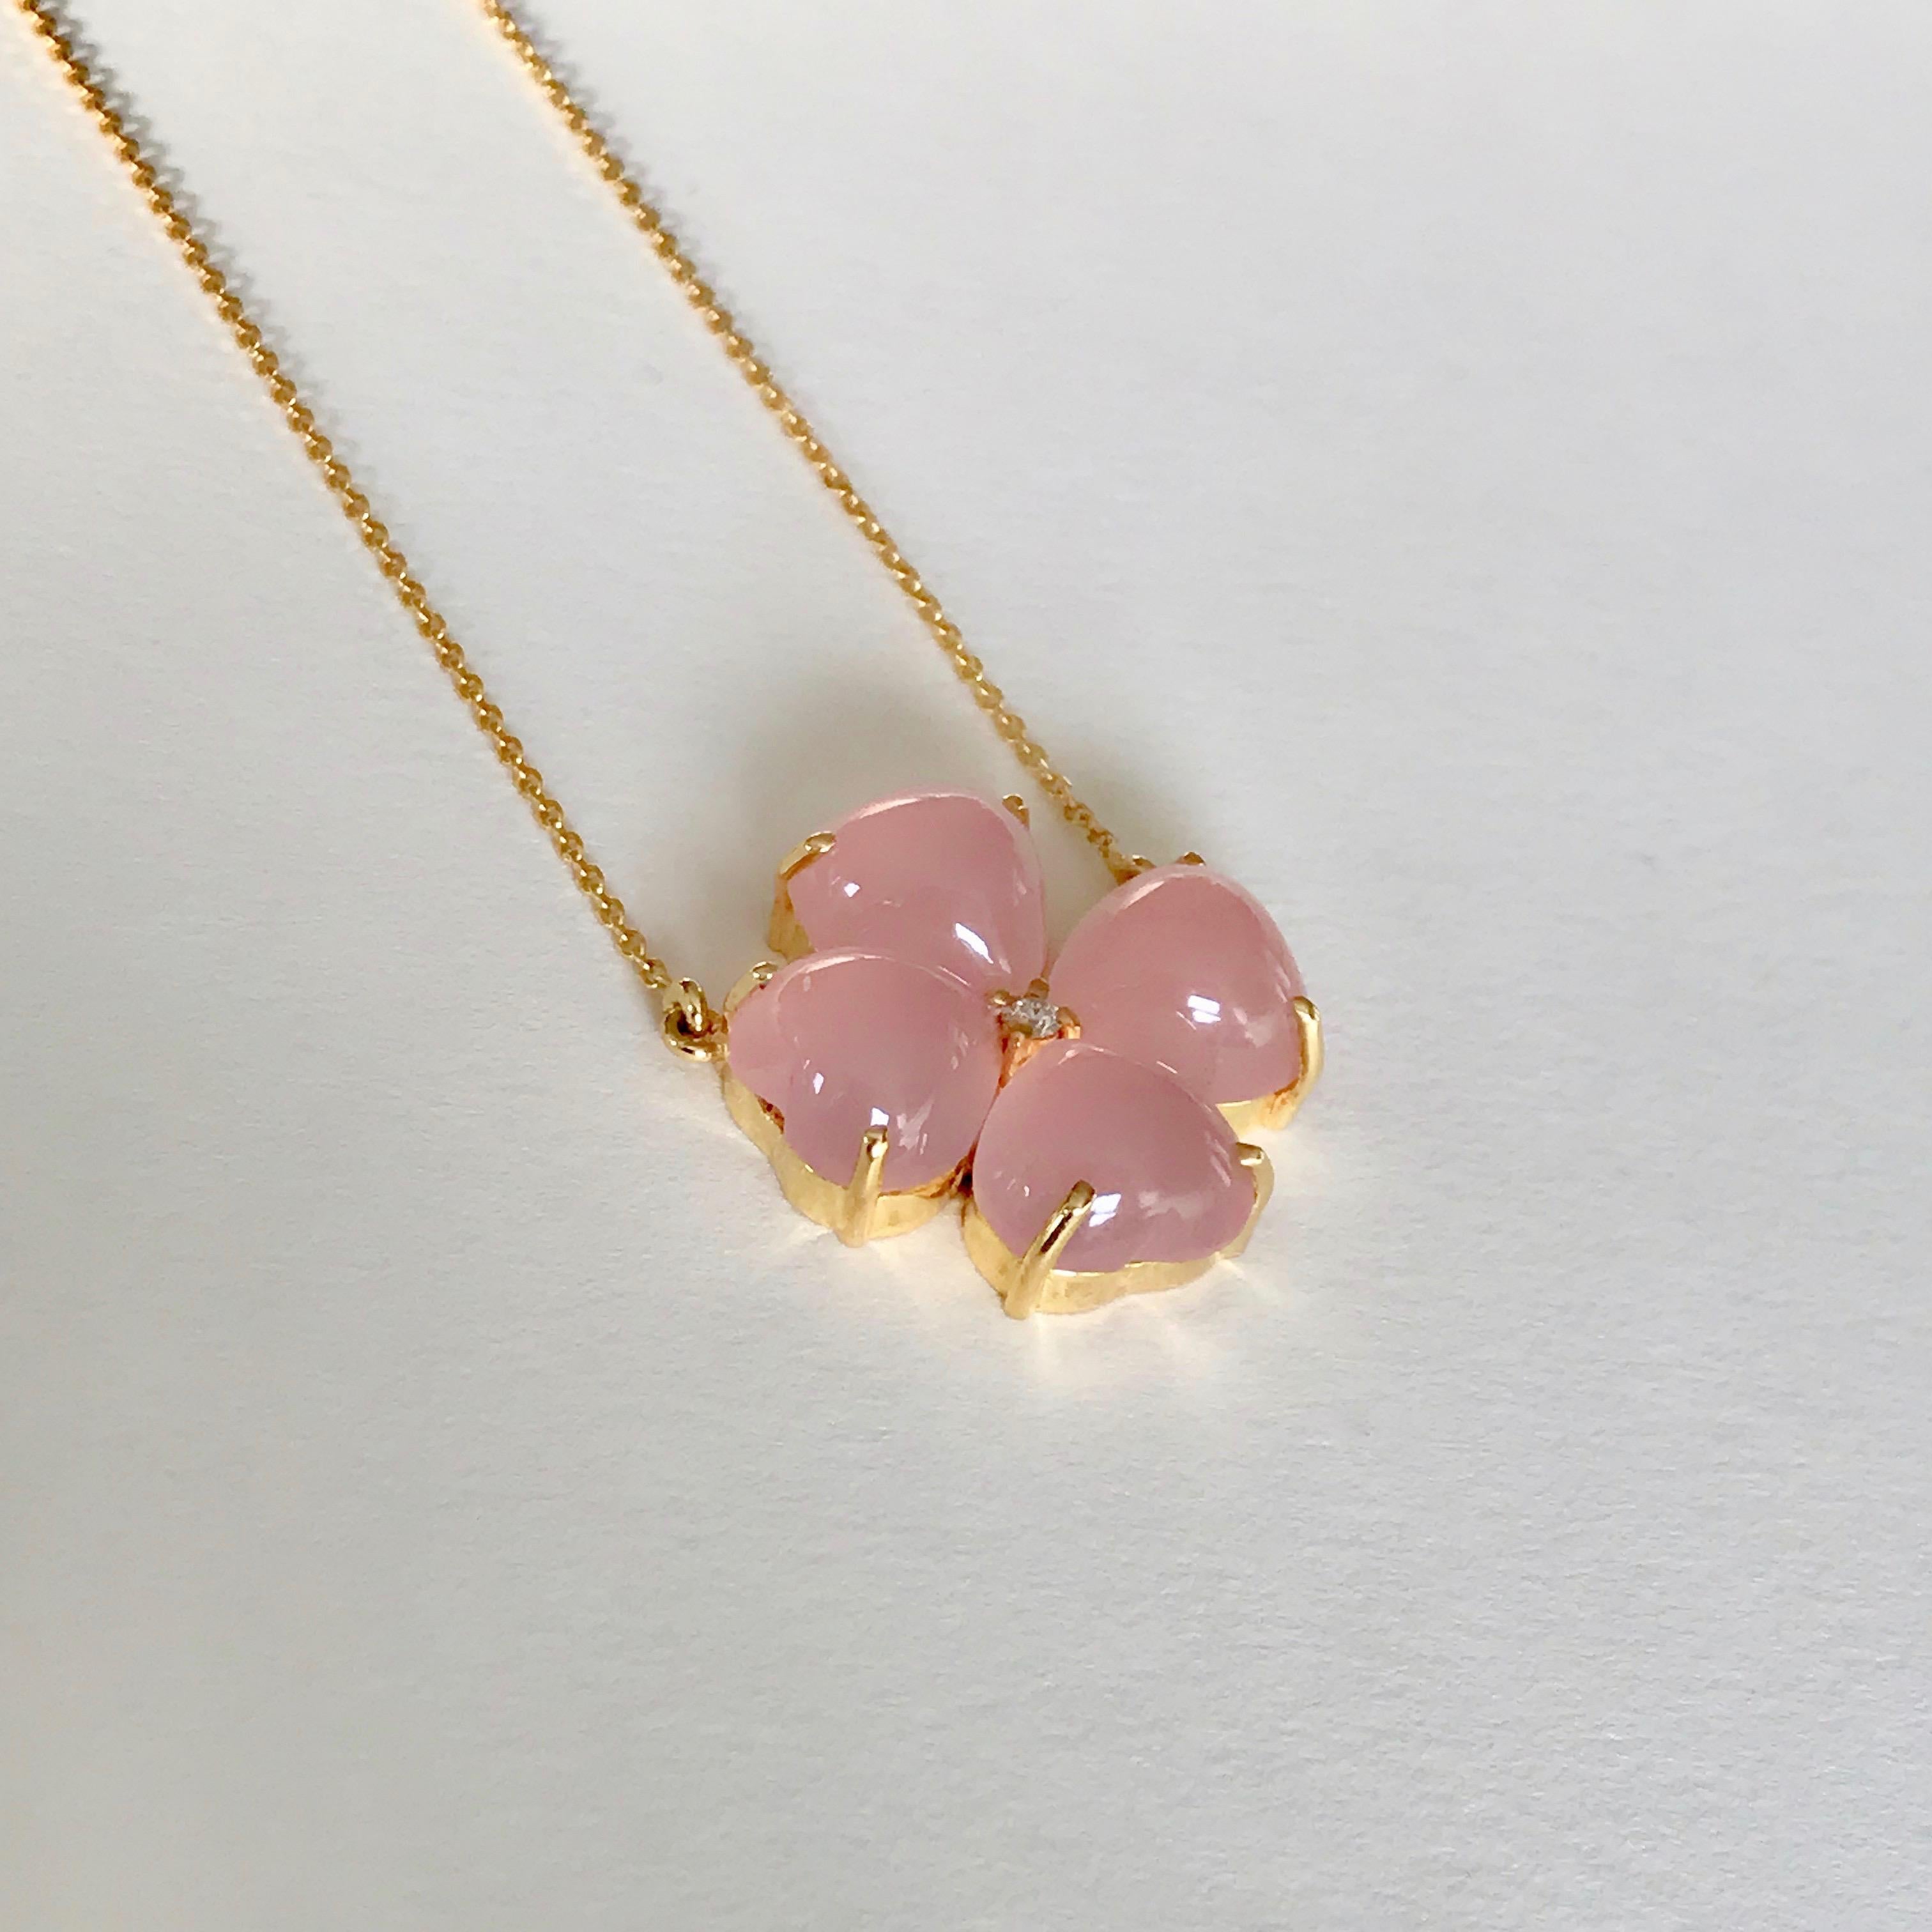 Cabochon Handmade 18 Karat Solid Yellow Gold Pink Chalcedony Clover Pendant Necklace For Sale